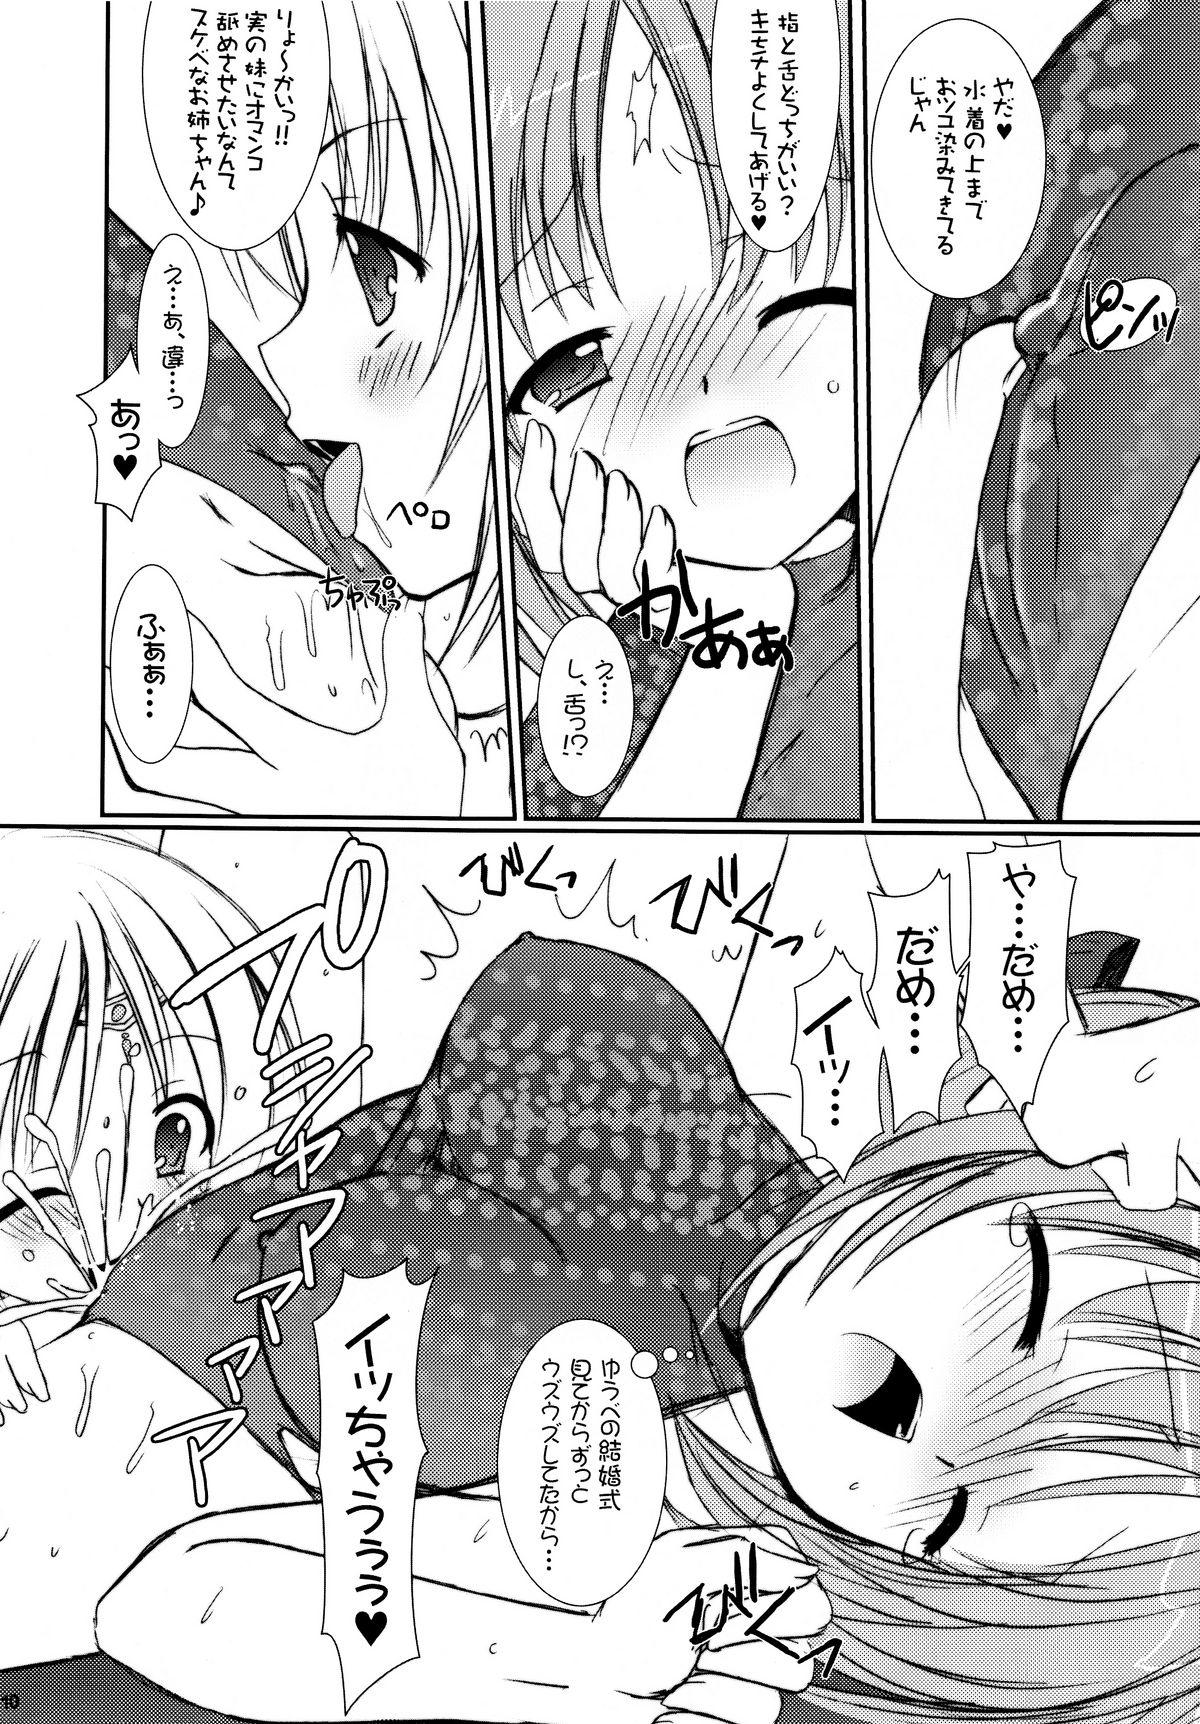 Licking Pussy Lovely Poison 7 - Ragnarok online Enema - Page 10